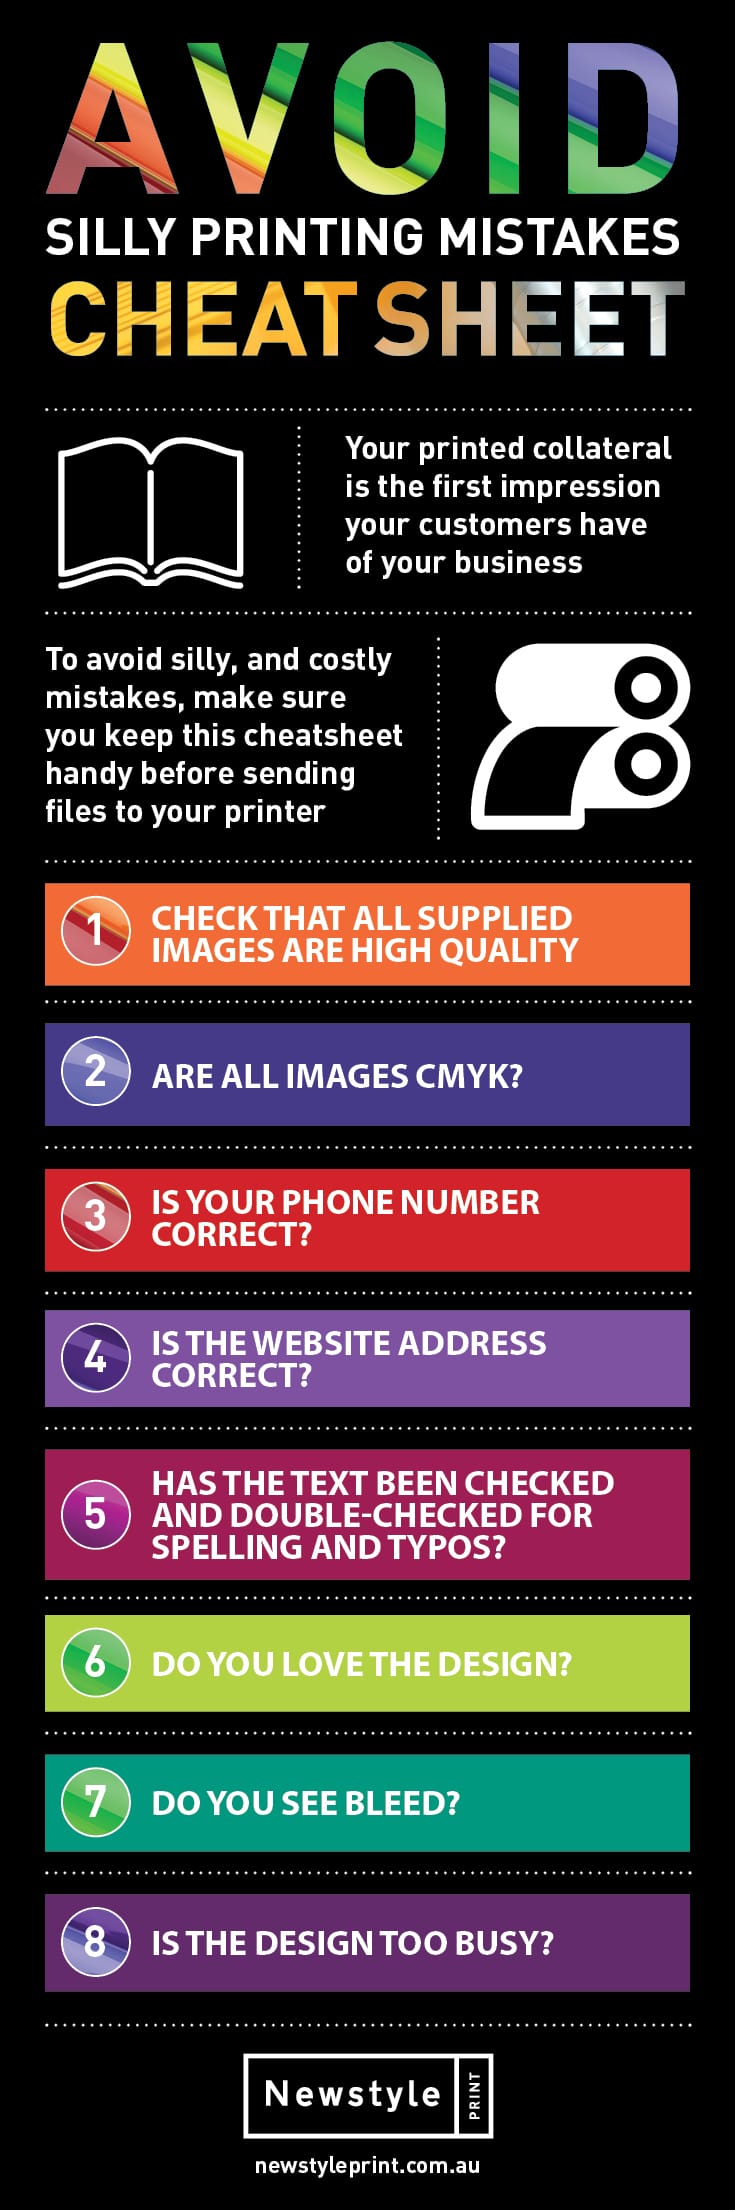 Top 5 Printing Mistakes Infographic